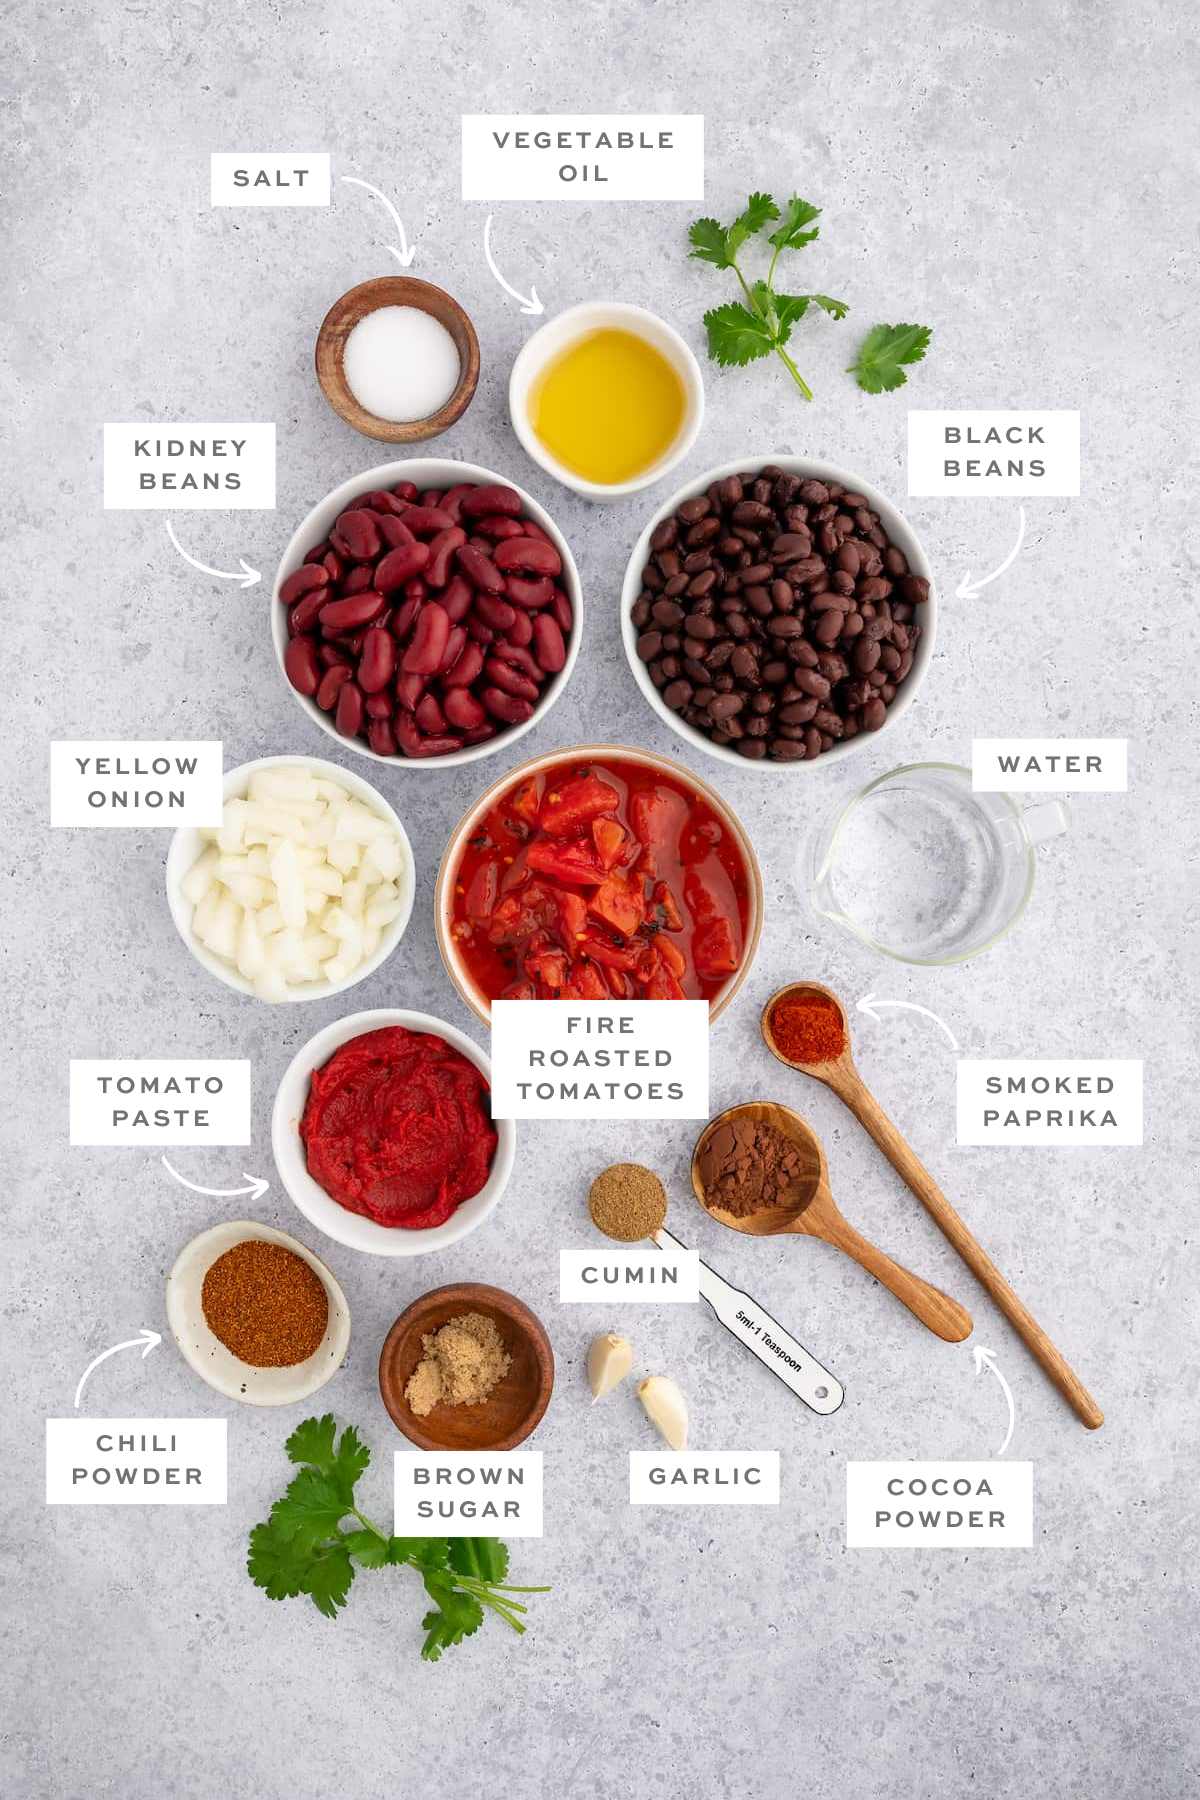 Gathered ingredients for this vegan chili recipe in various bowls with labels.